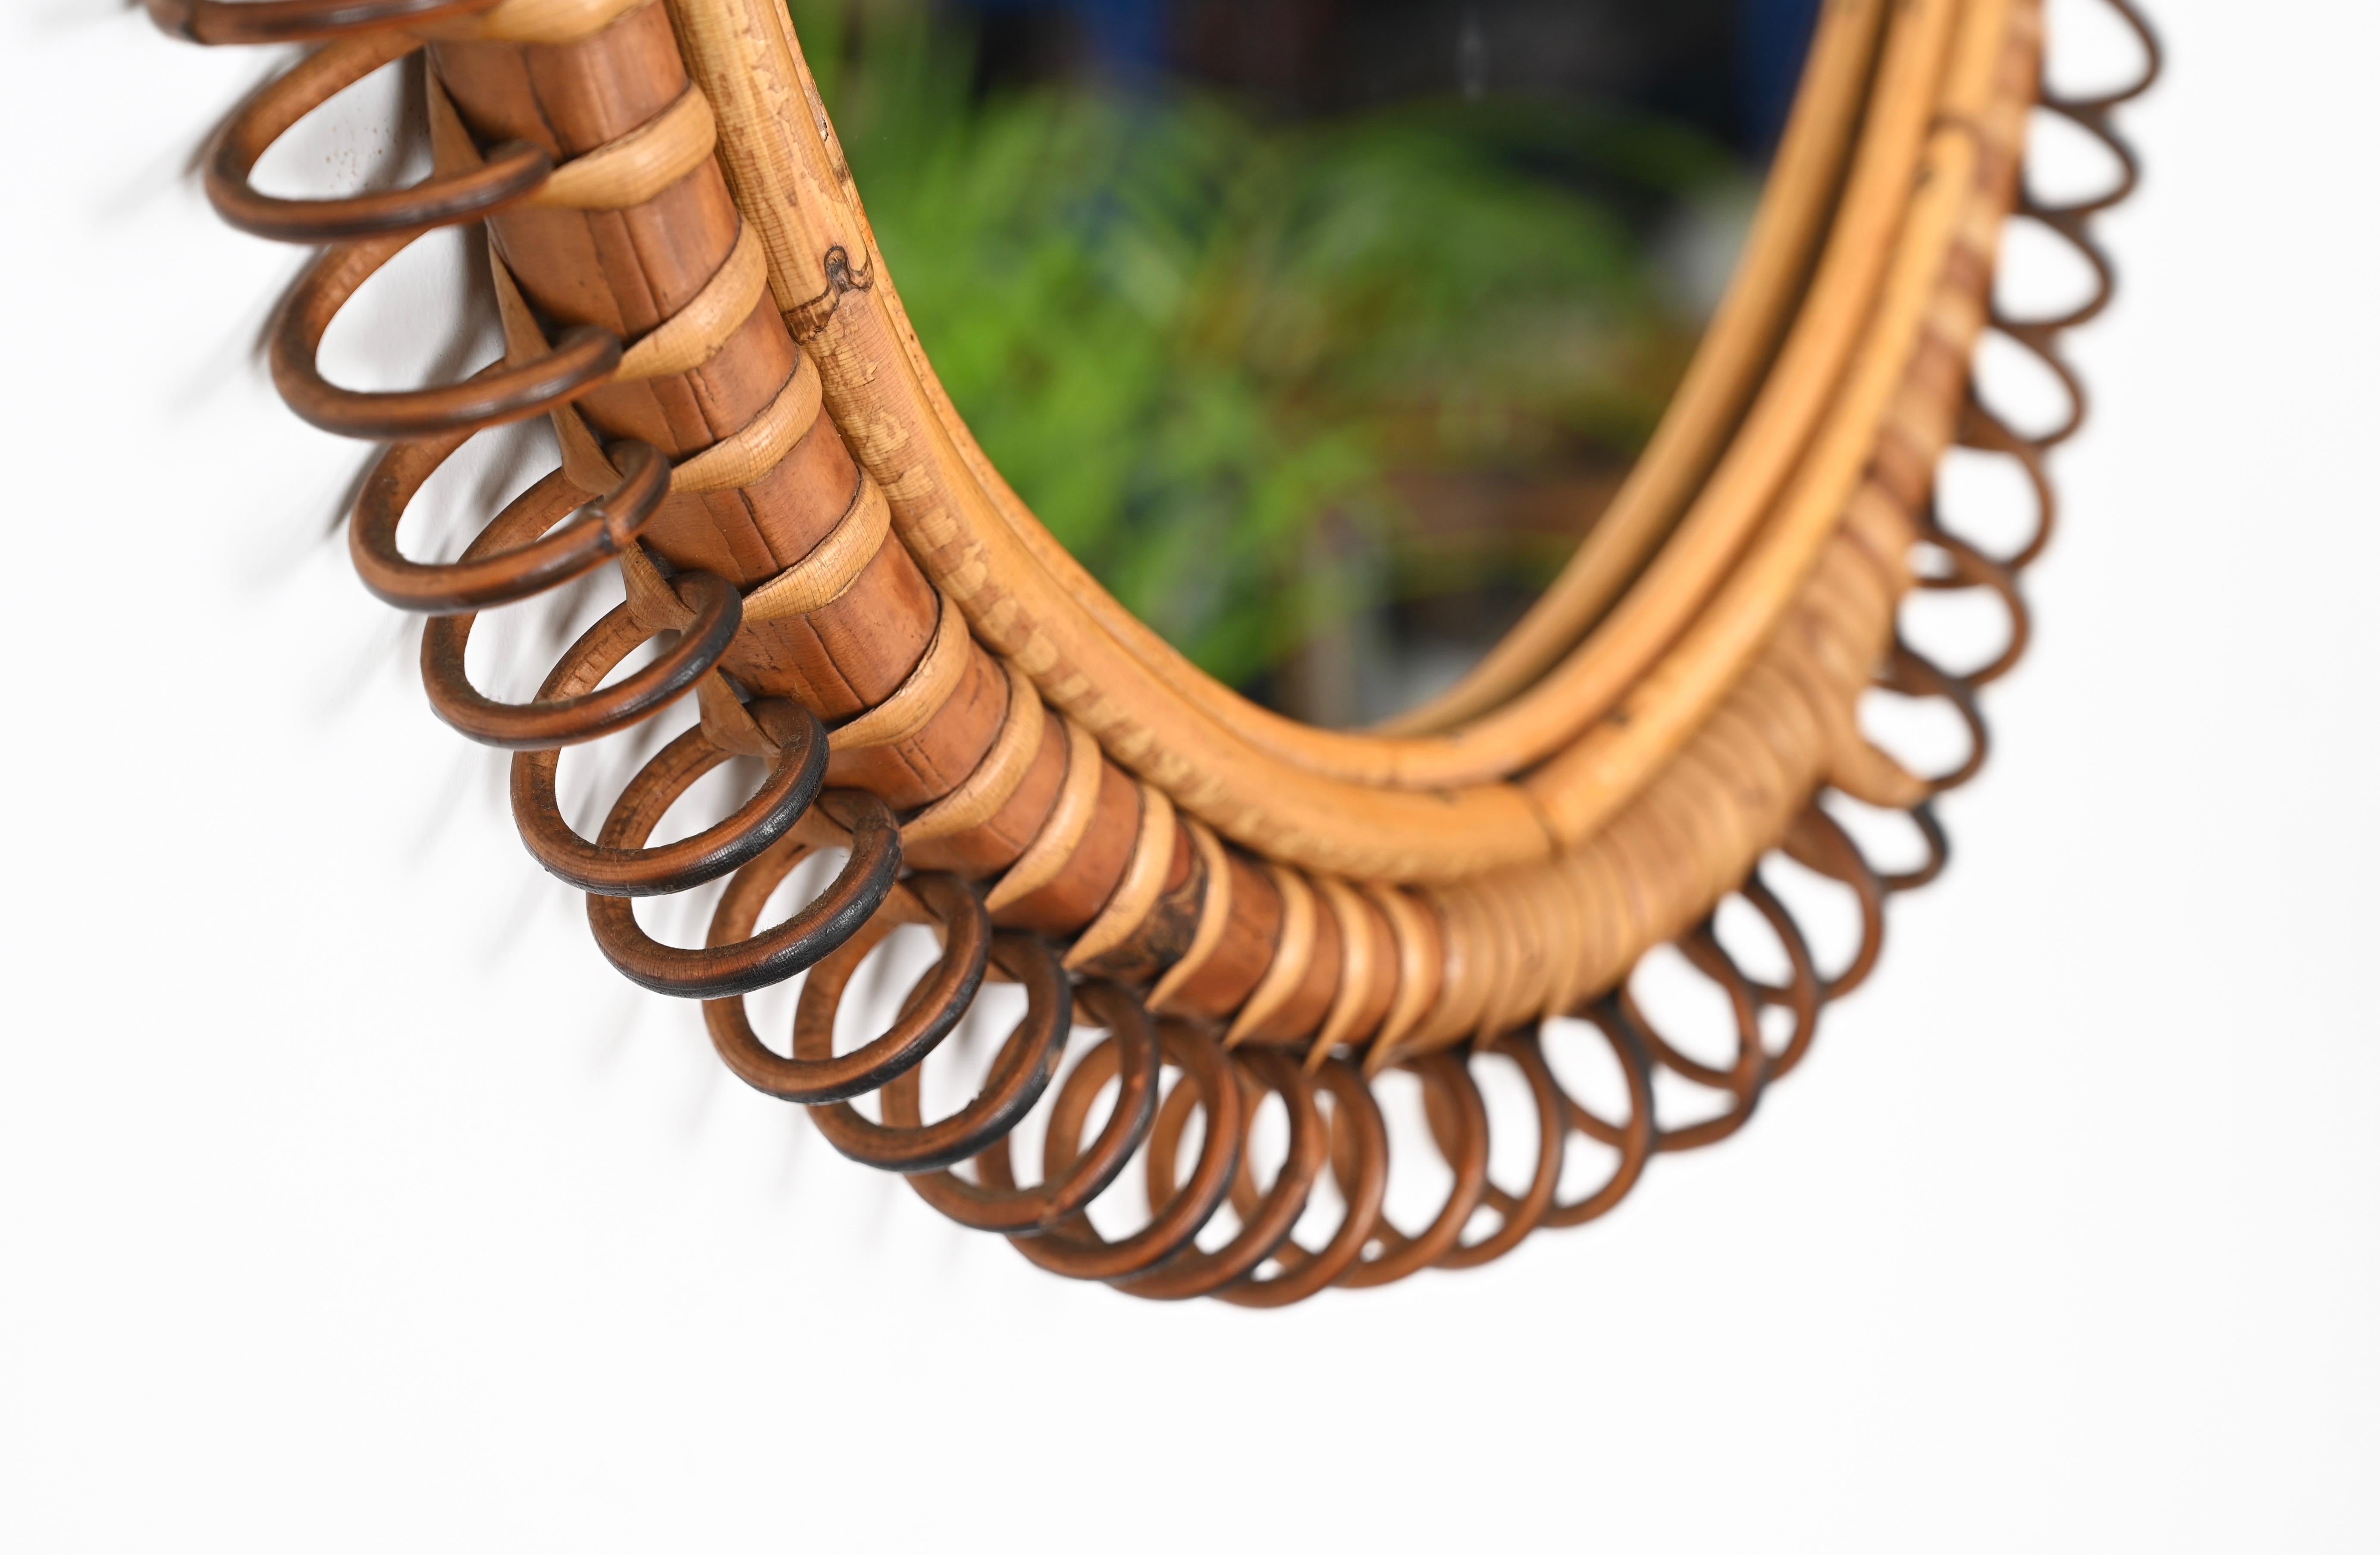 French Riviera Oval Mirror in Spiral Rattan, Wicker and Bamboo, Italy 1960s 1